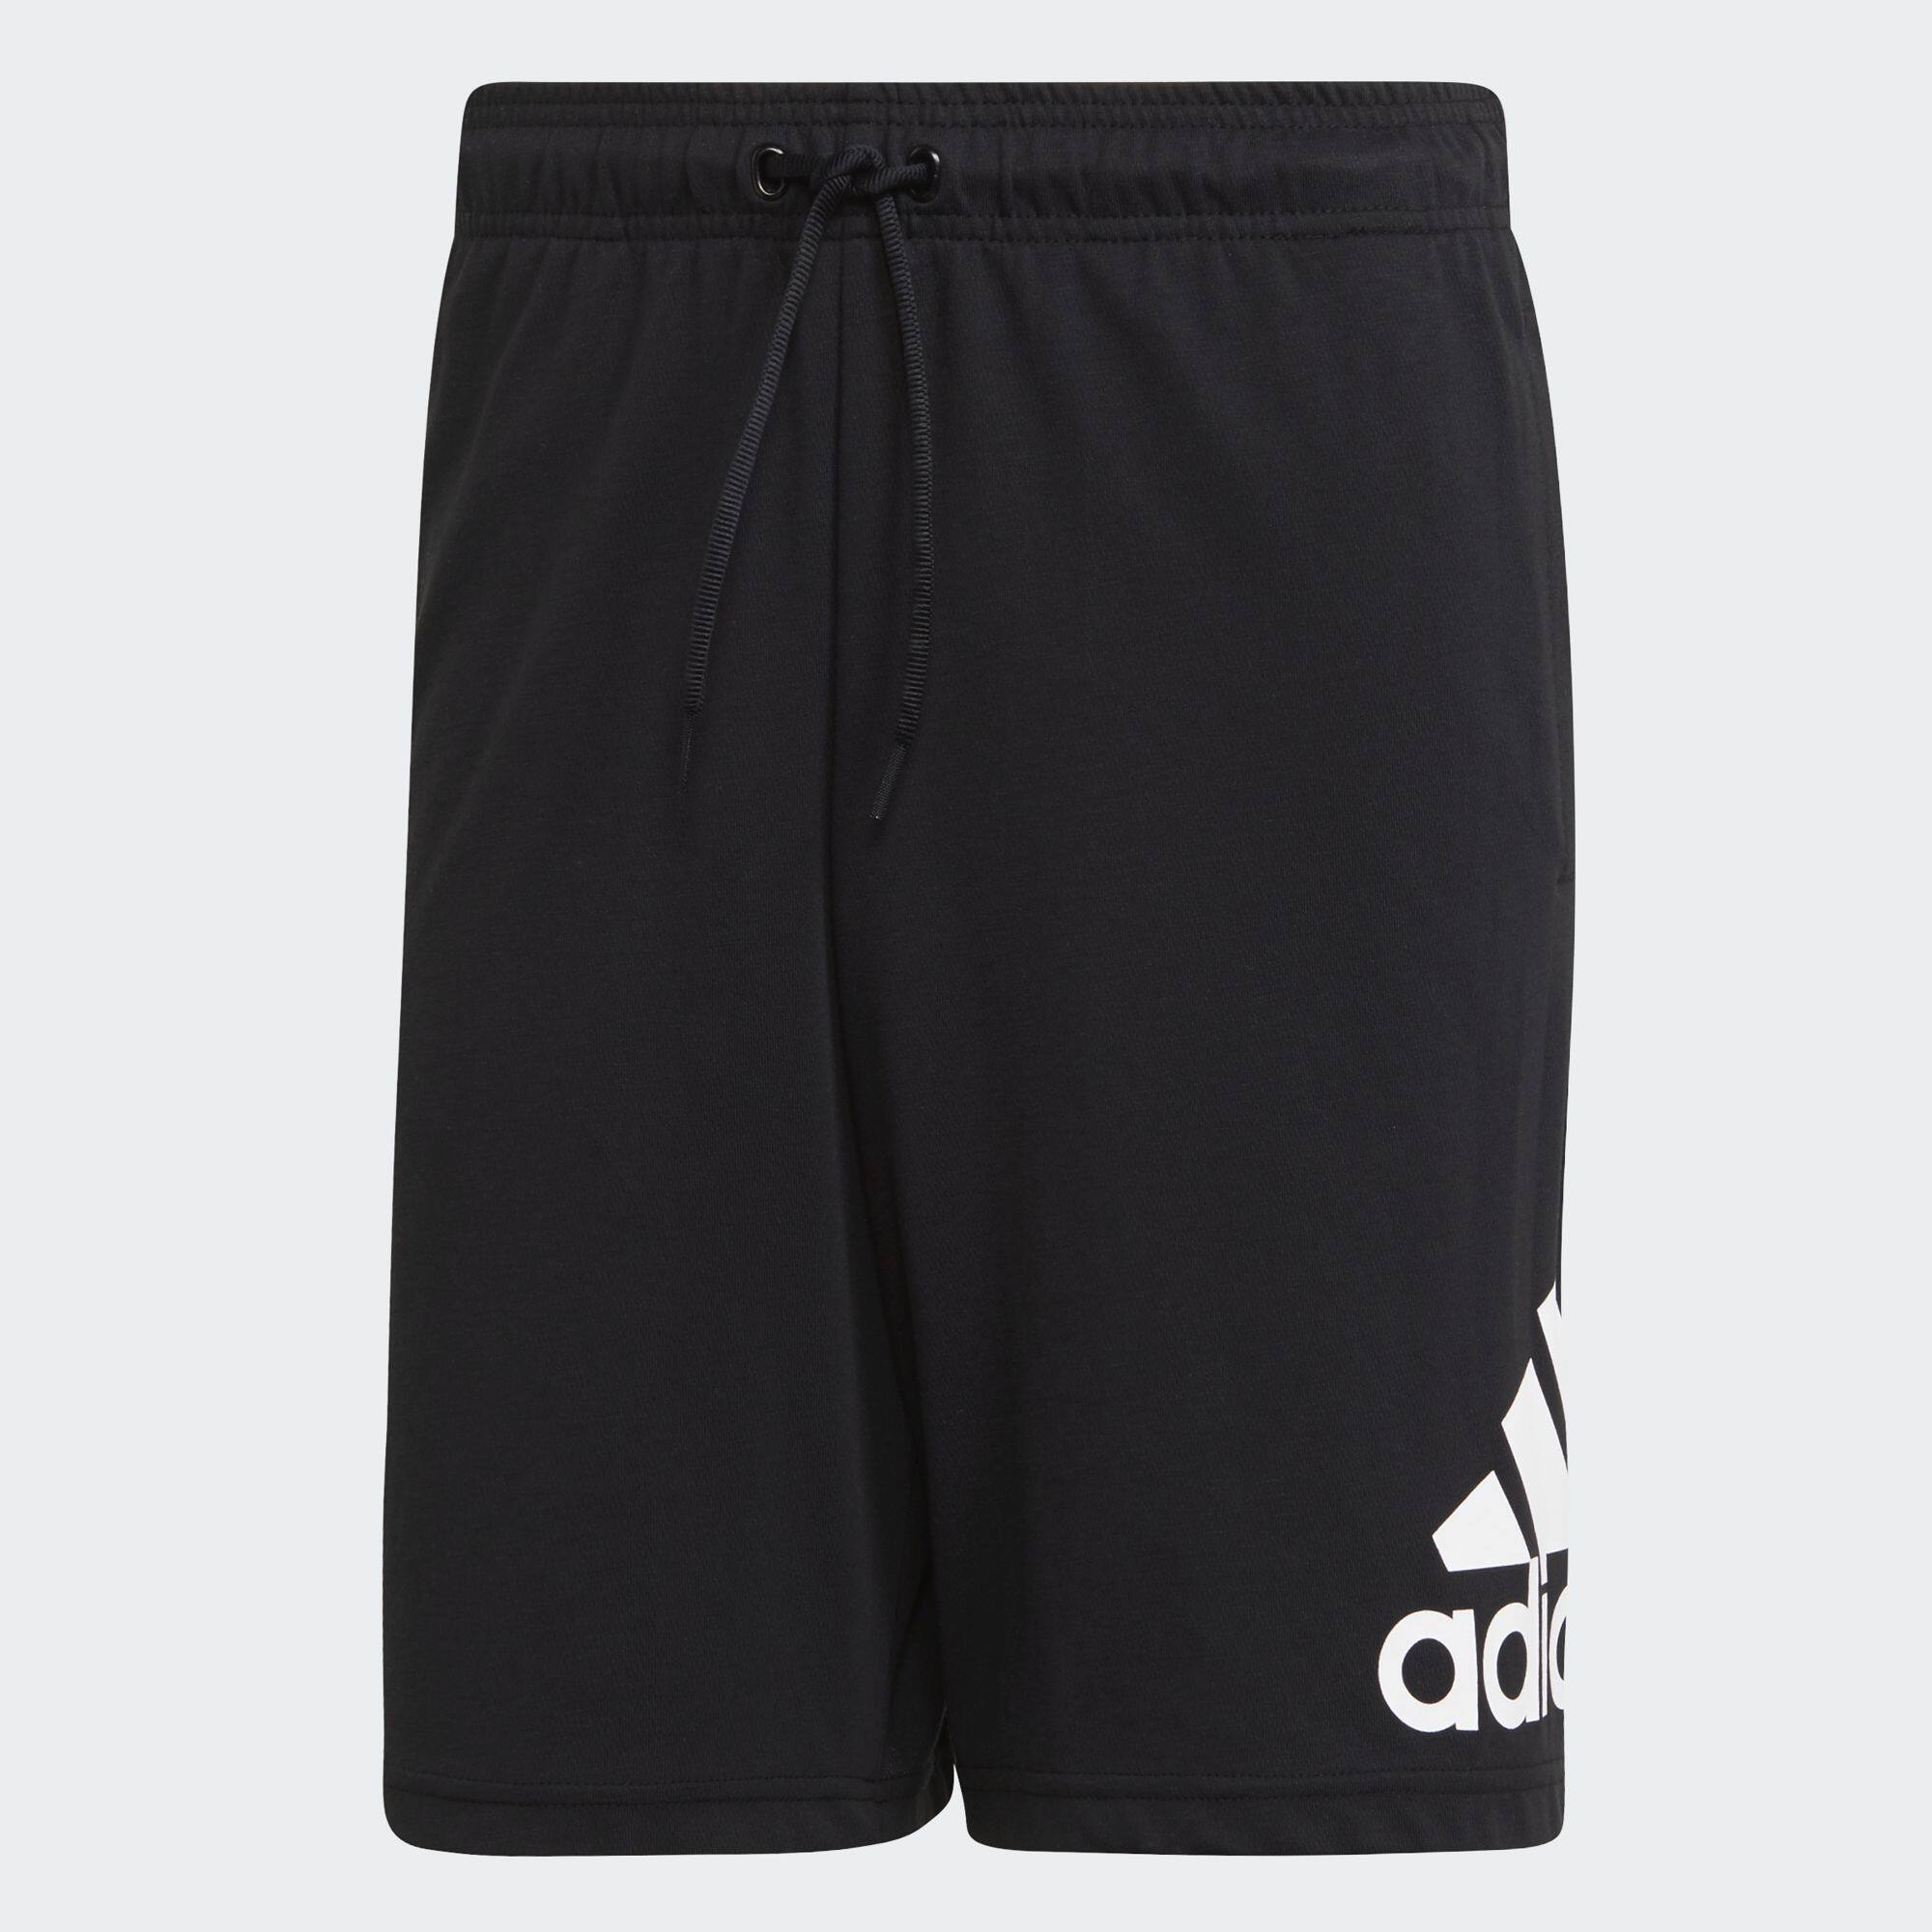 adidas NOT SPORTS SPECIFIC Must Haves Badge of Sport Shorts ผู้ชาย สีดำ DX7666